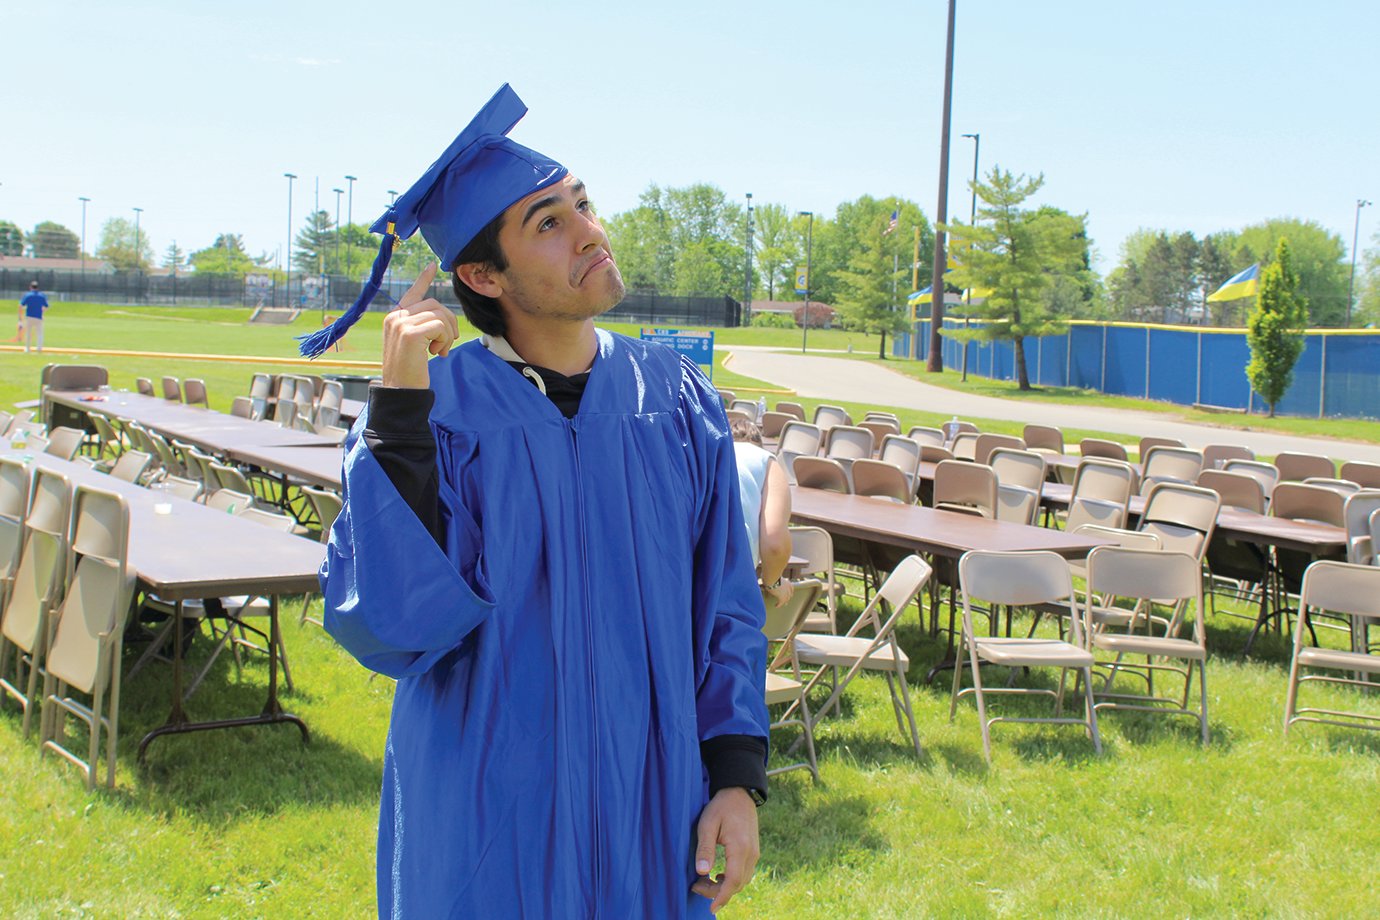 Senior Athenian Arthur Ruano contemplates what his next steps in life may be following graduation. Ruano and the entire senior class at CHS visited the corporation's three elementary schools Tuesday.